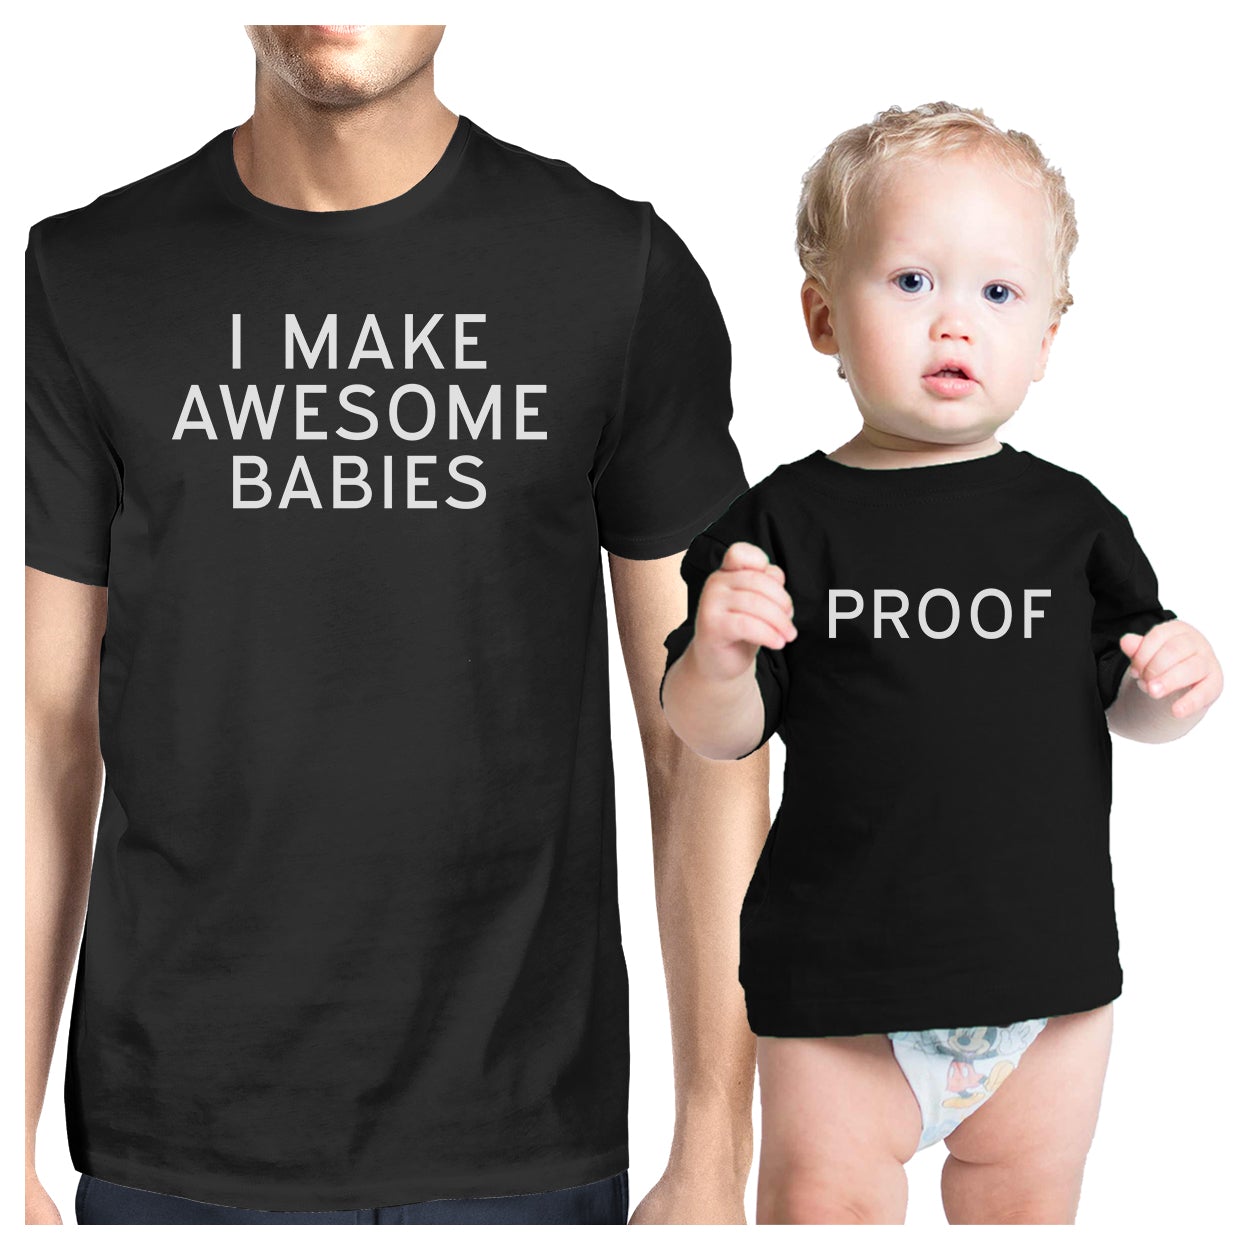 Awesome Babies Proof Matching Graphic T-Shirts For Dad and Baby Boy Black